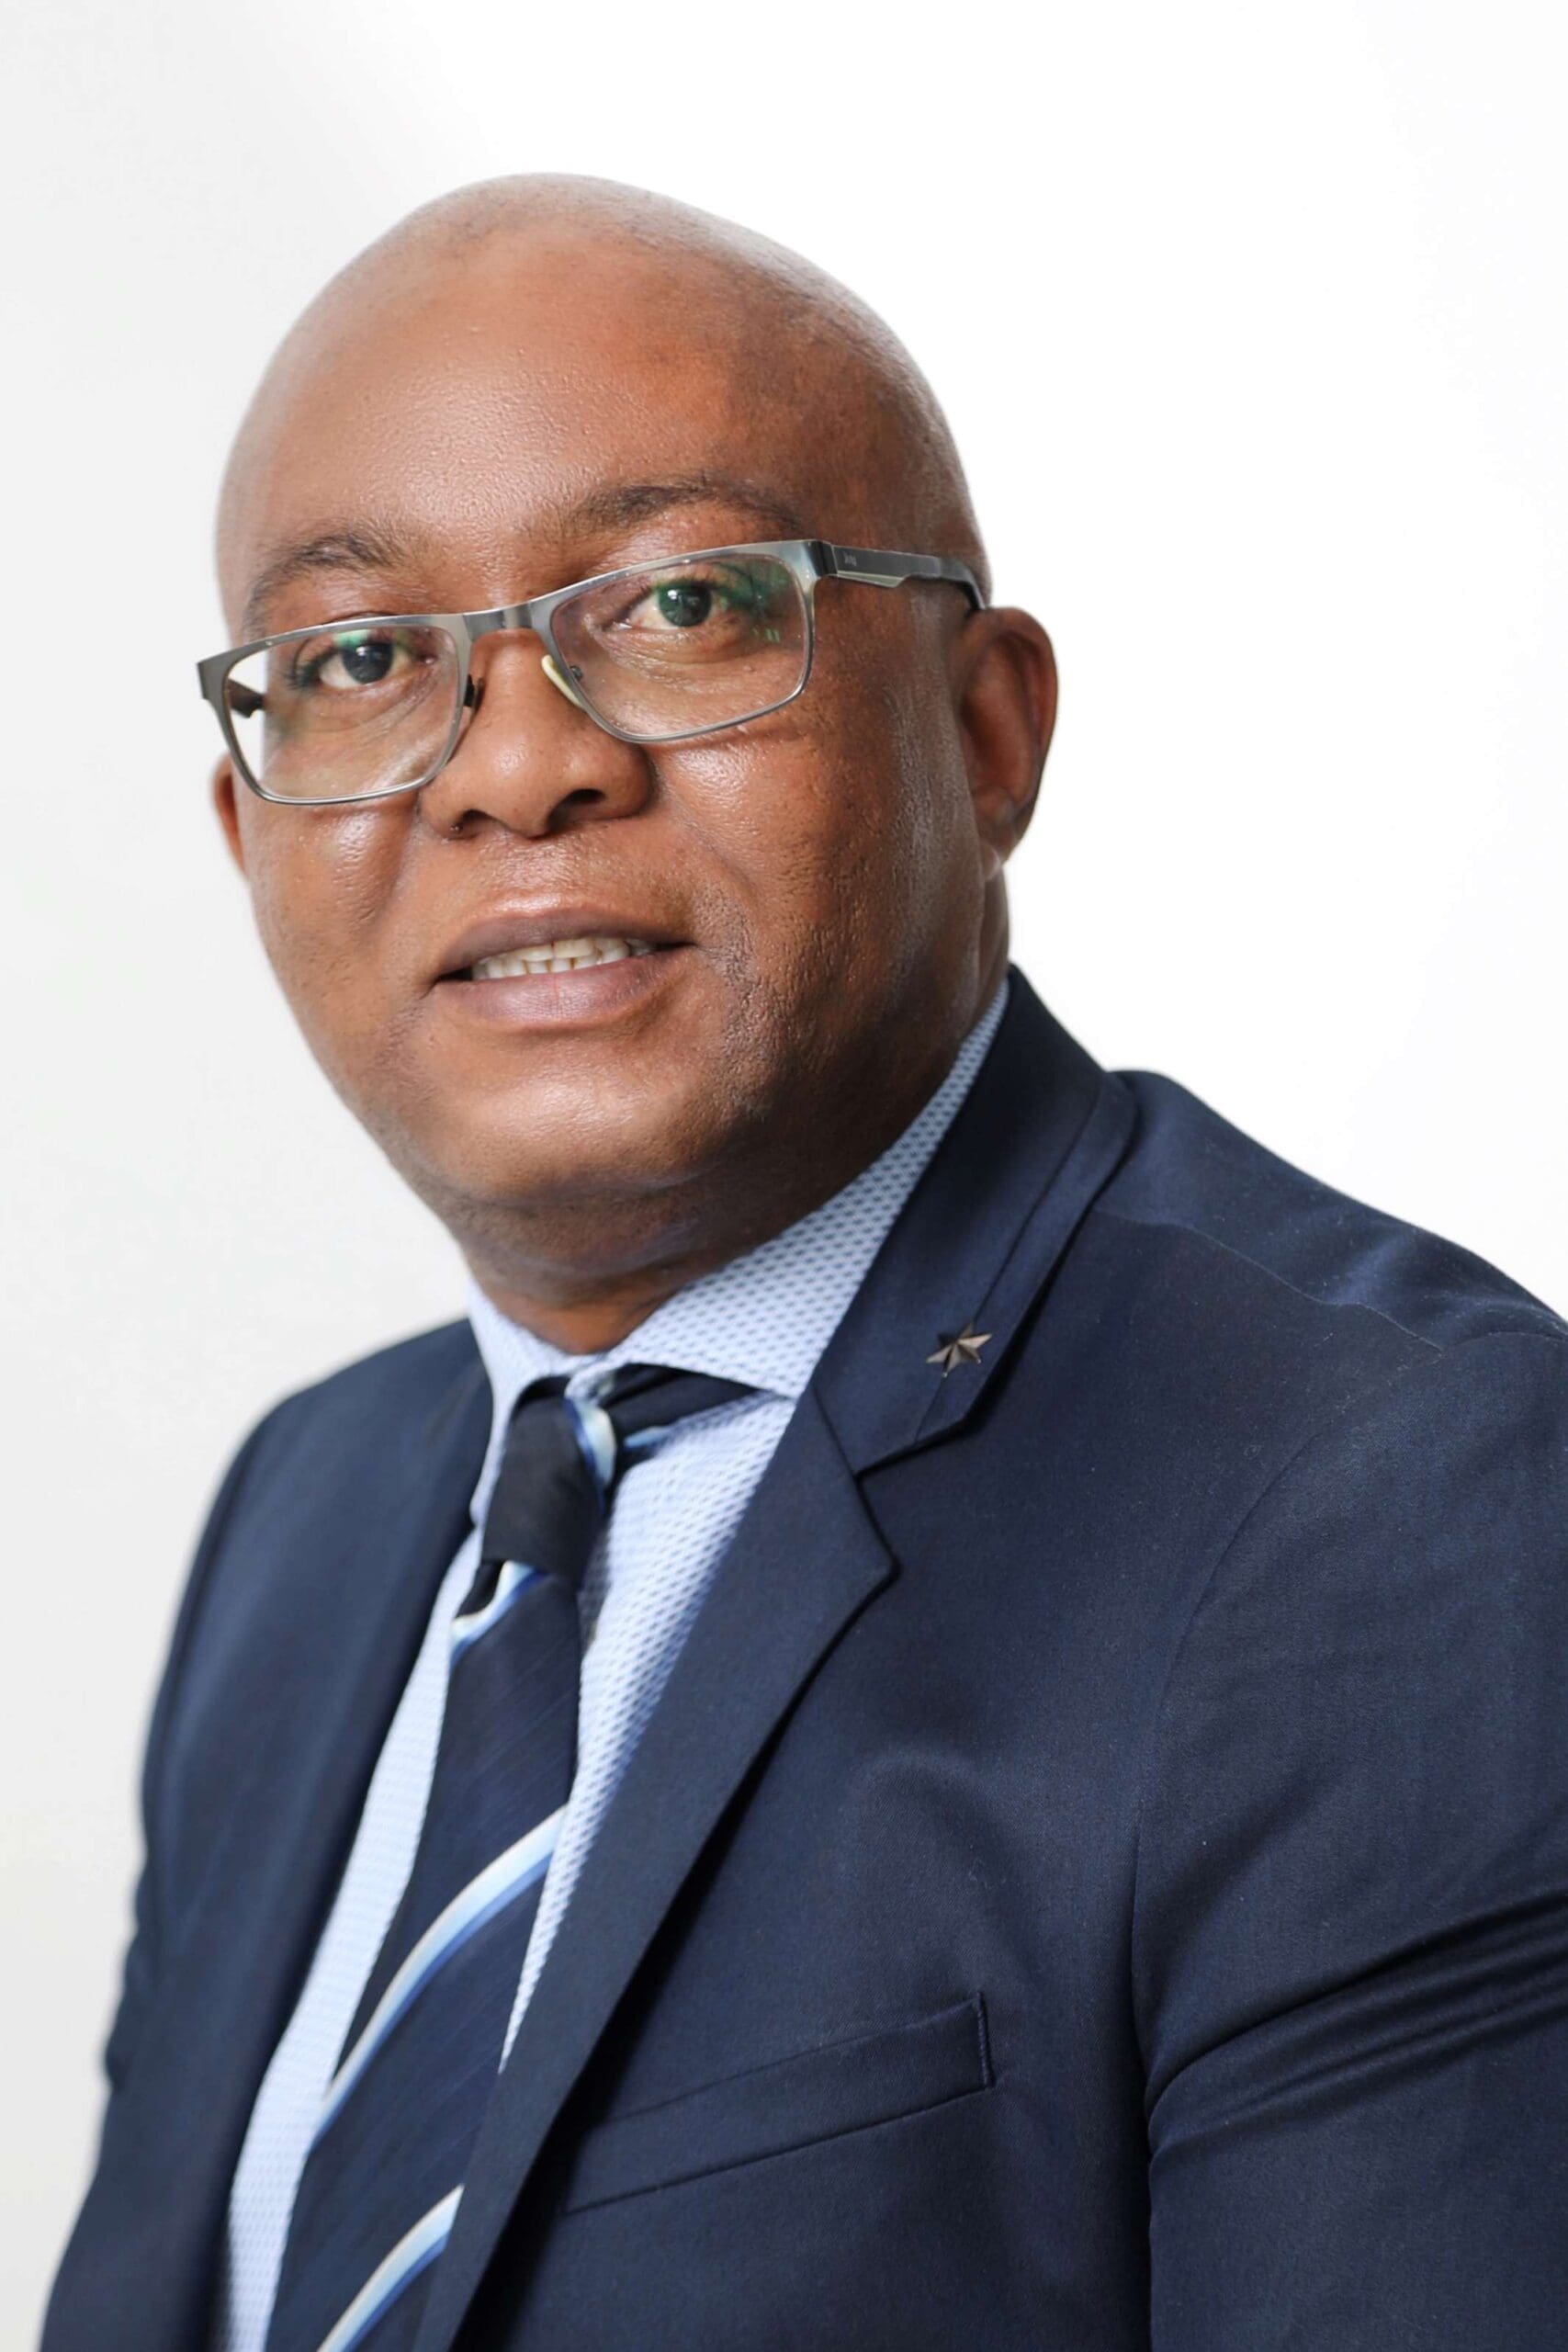 Kabelo Makeke, Head of Personal and Private Banking at Standard Bank South Africa,